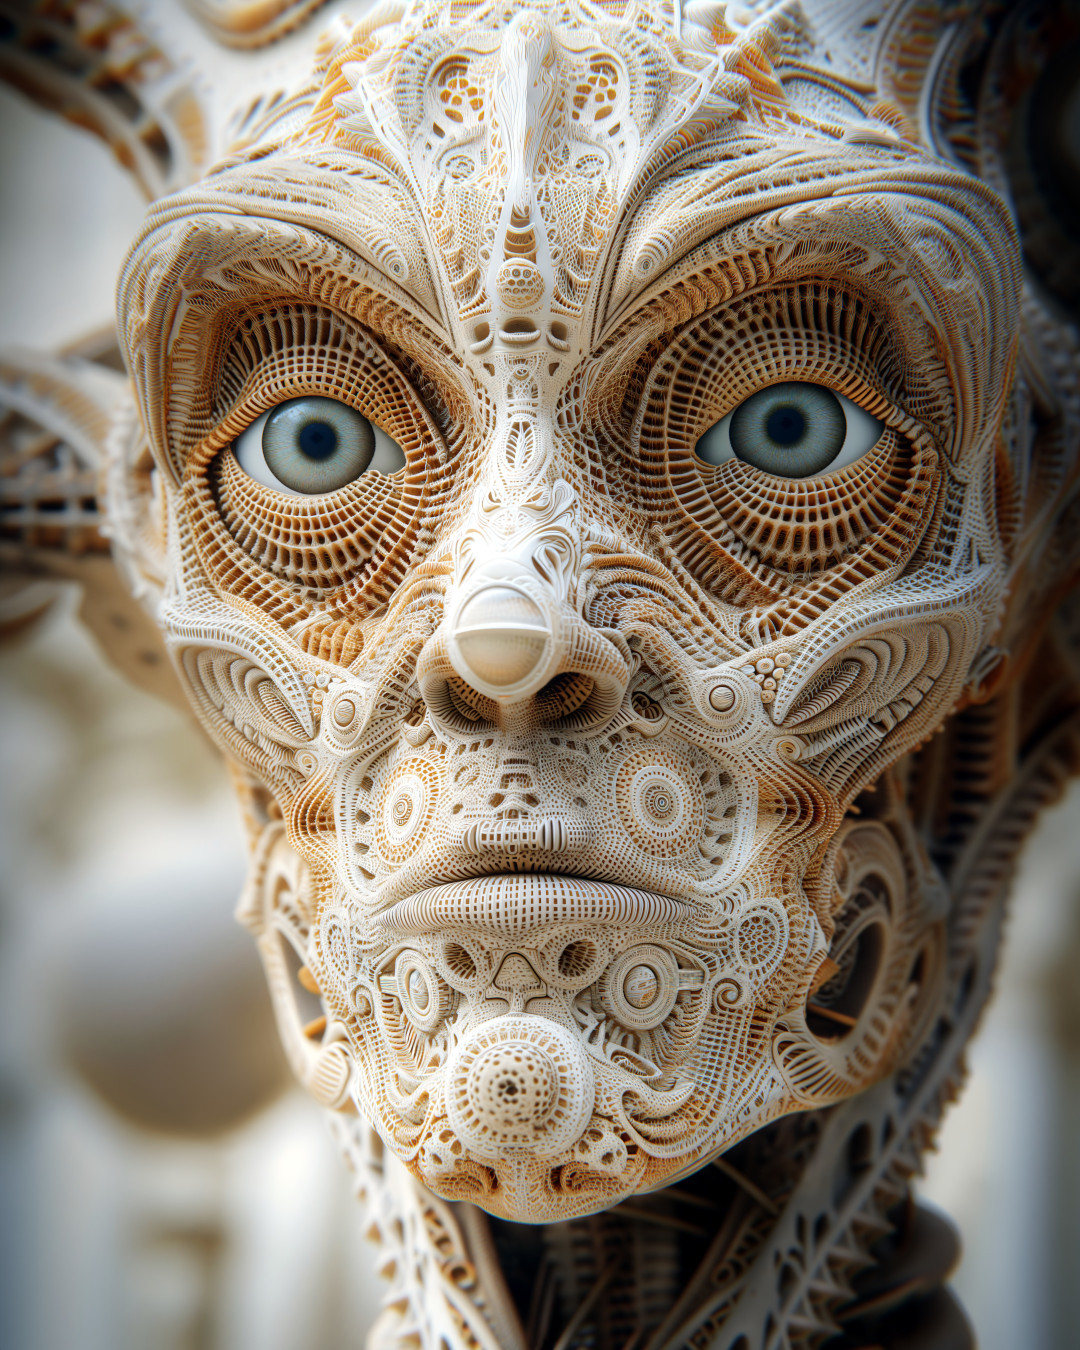 Sculpture of head, intricate composition, close-up